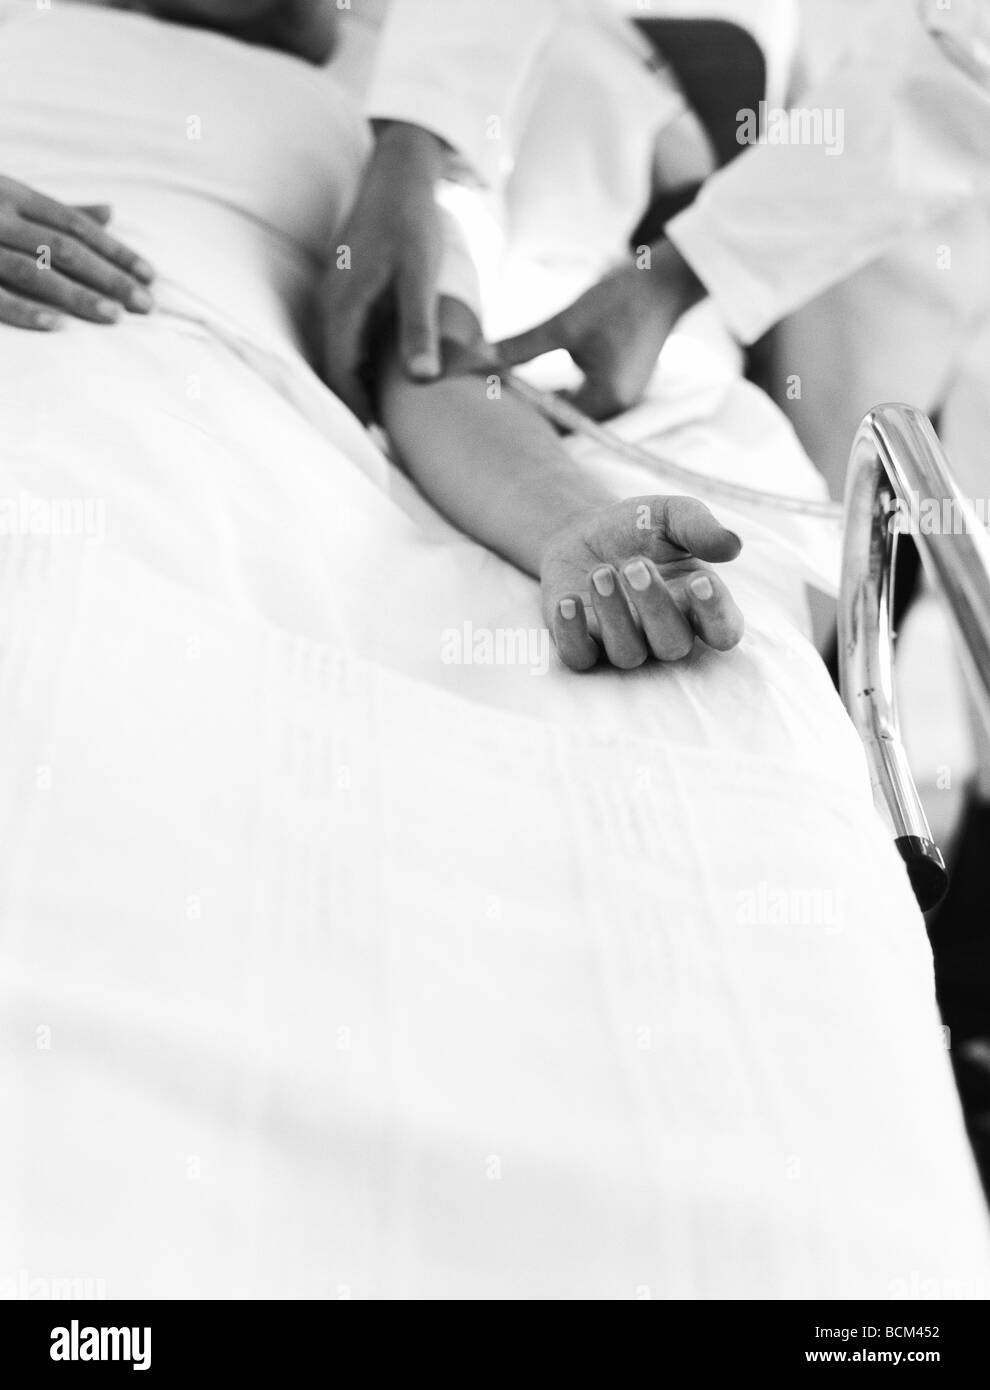 Patient lying in hospital bed, doctor adjusting IV drip Stock Photo